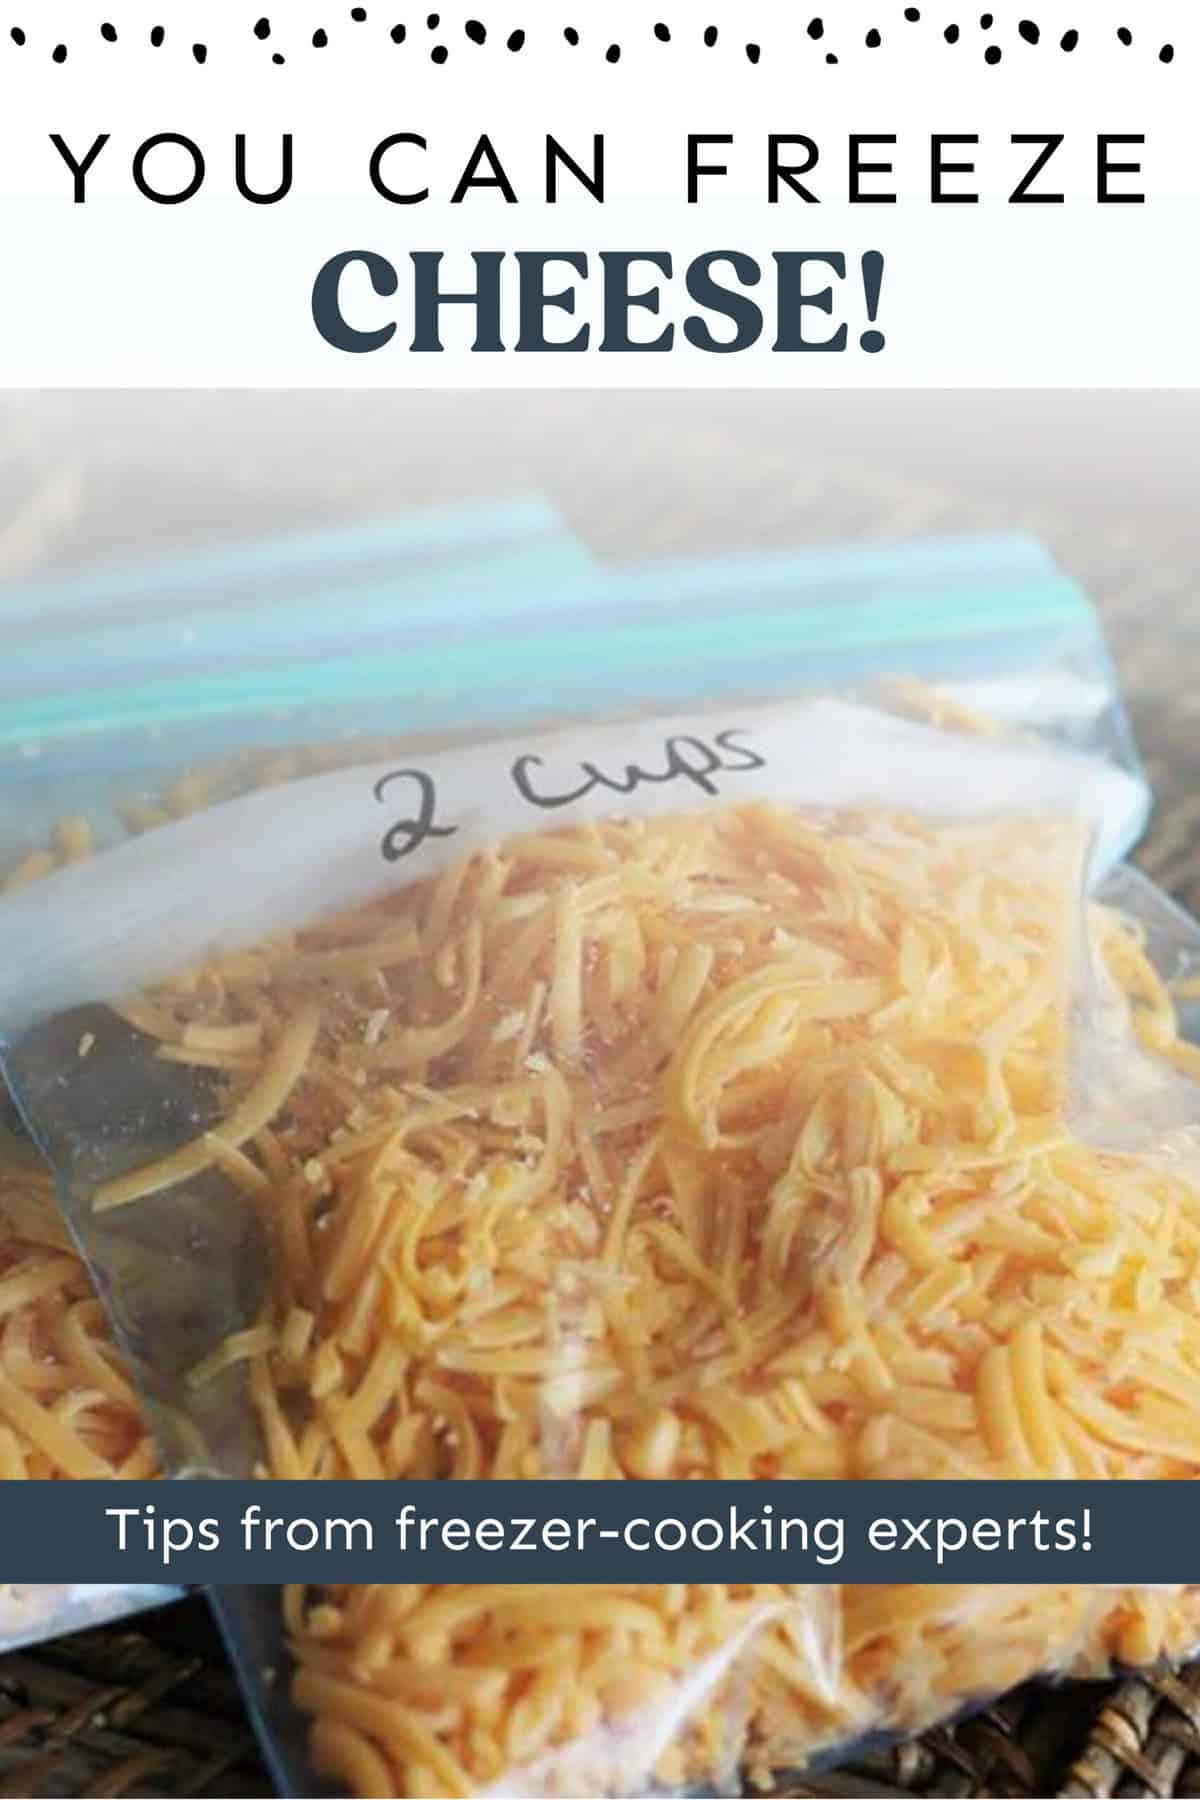 Shredded cheese in freezer bags labeled 2 cups.